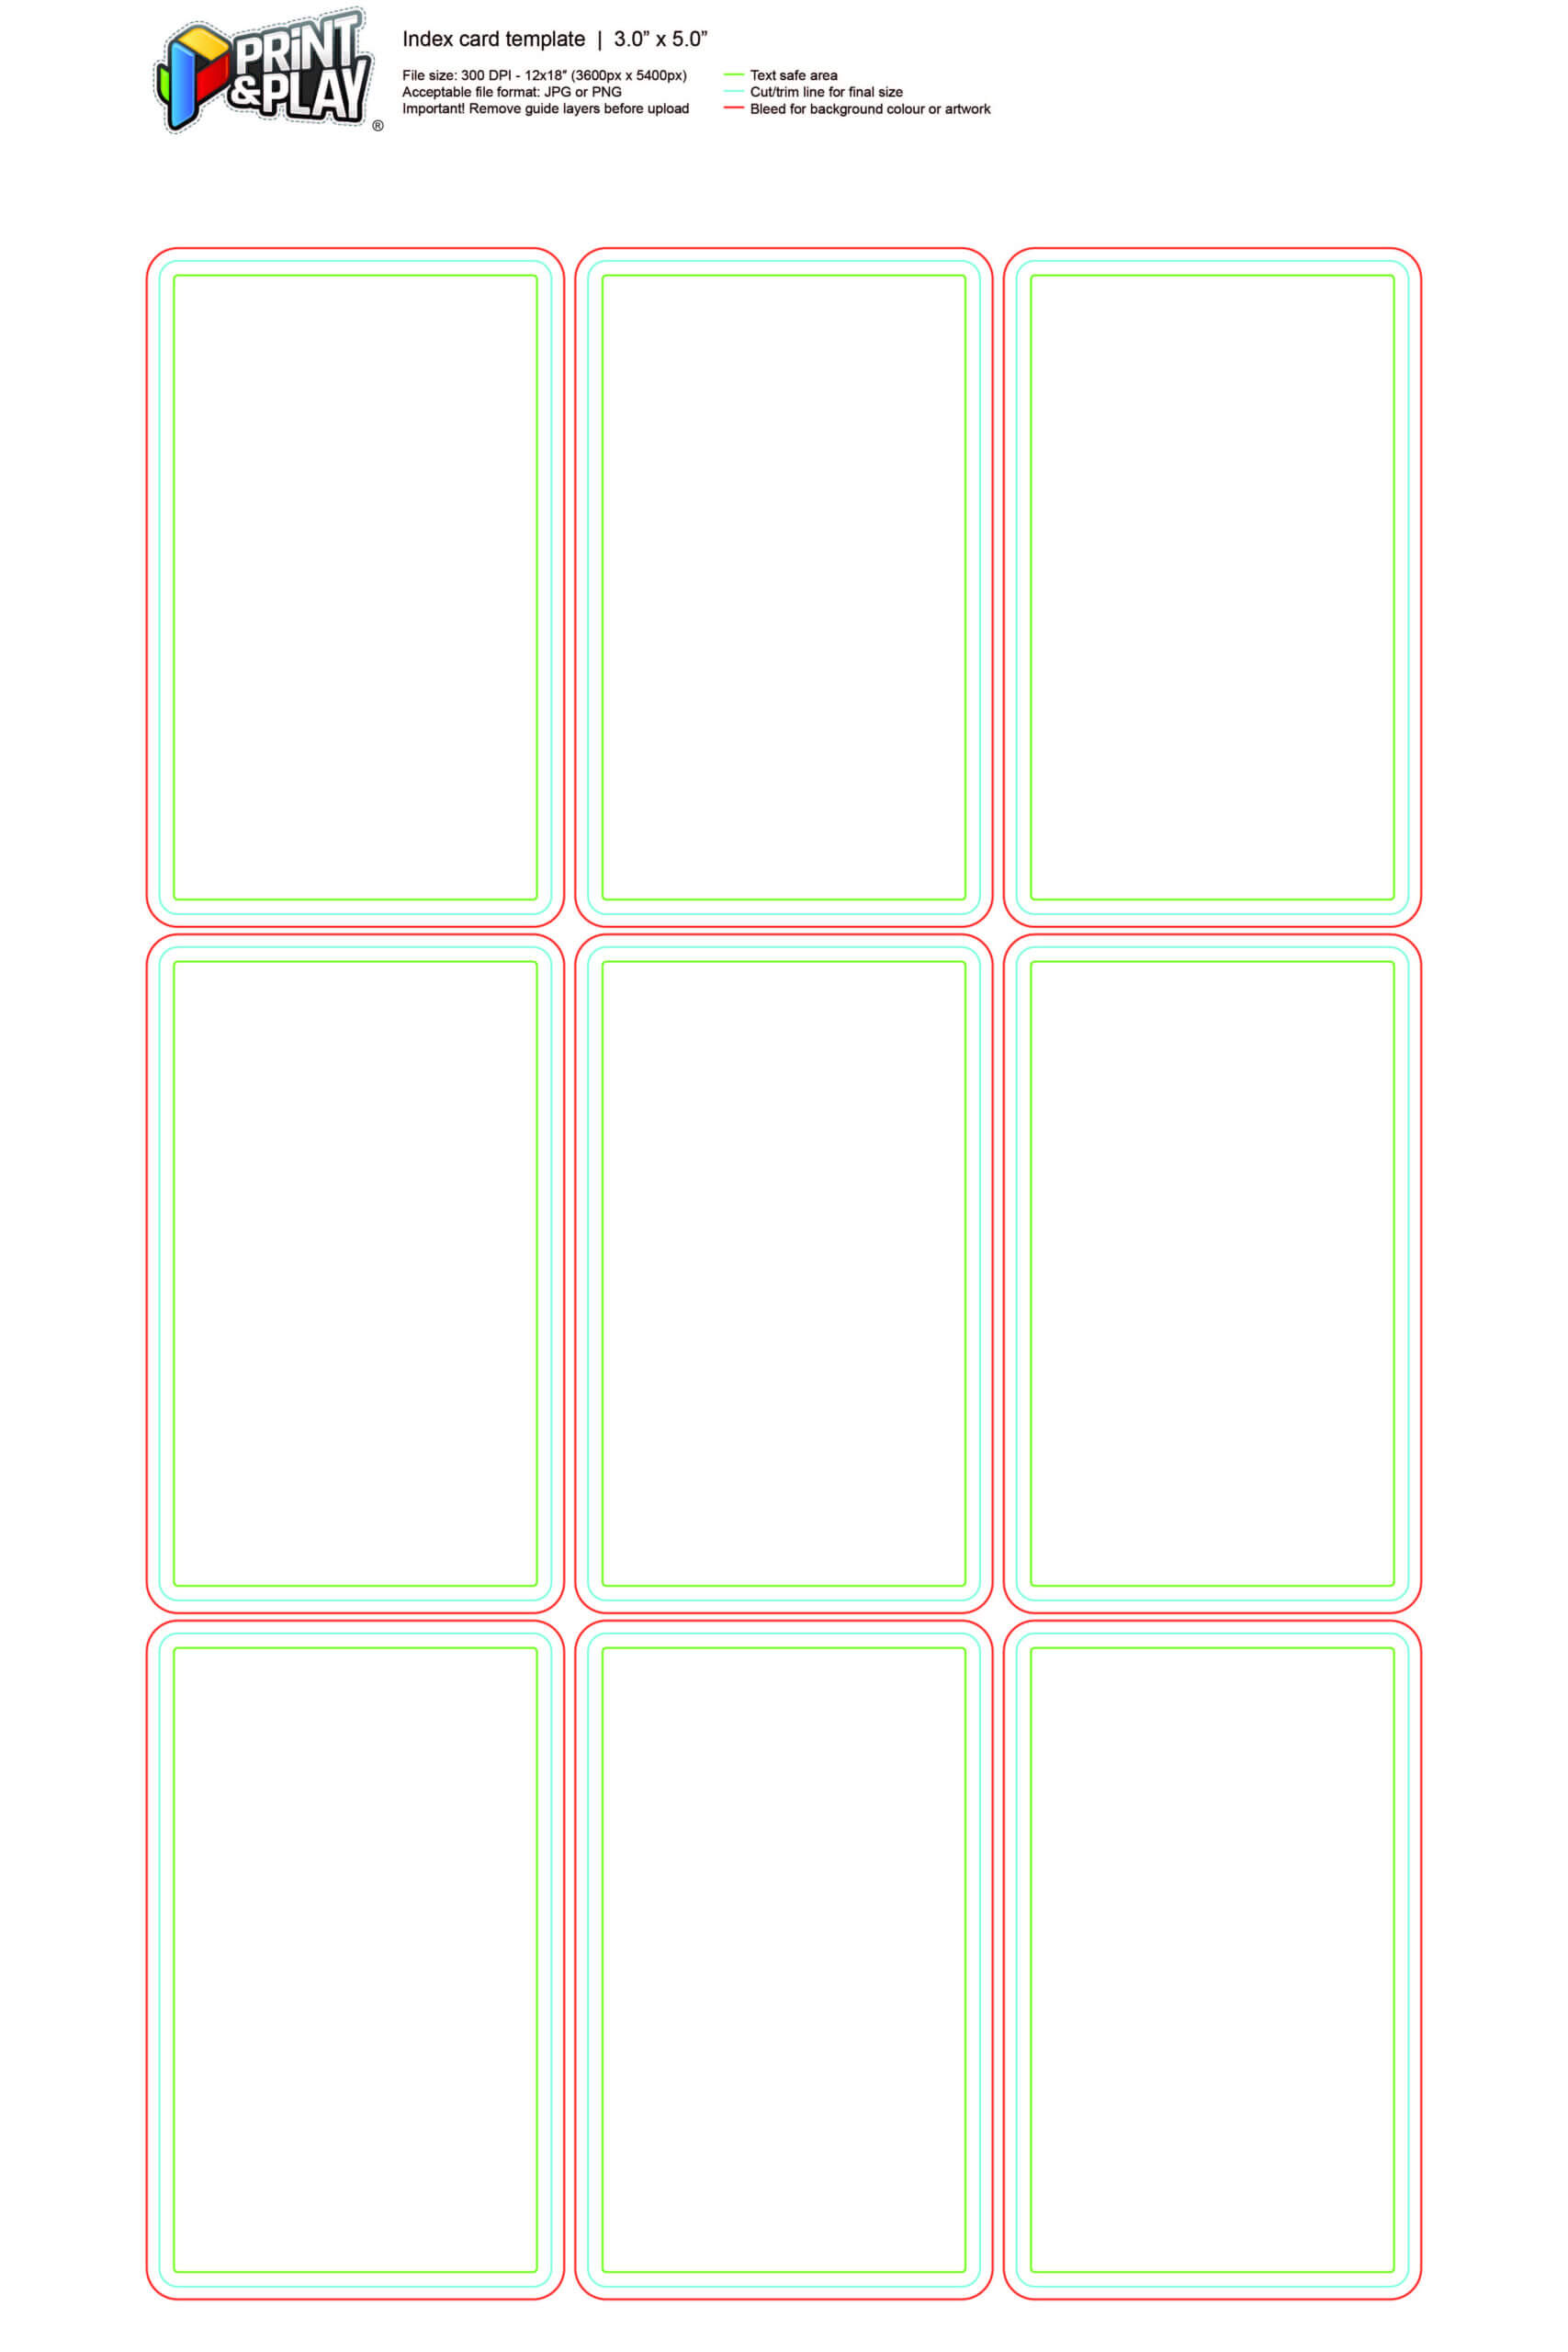 Playing Cards : Formatting & Templates – Print & Play Within 3 X 5 Index Card Template